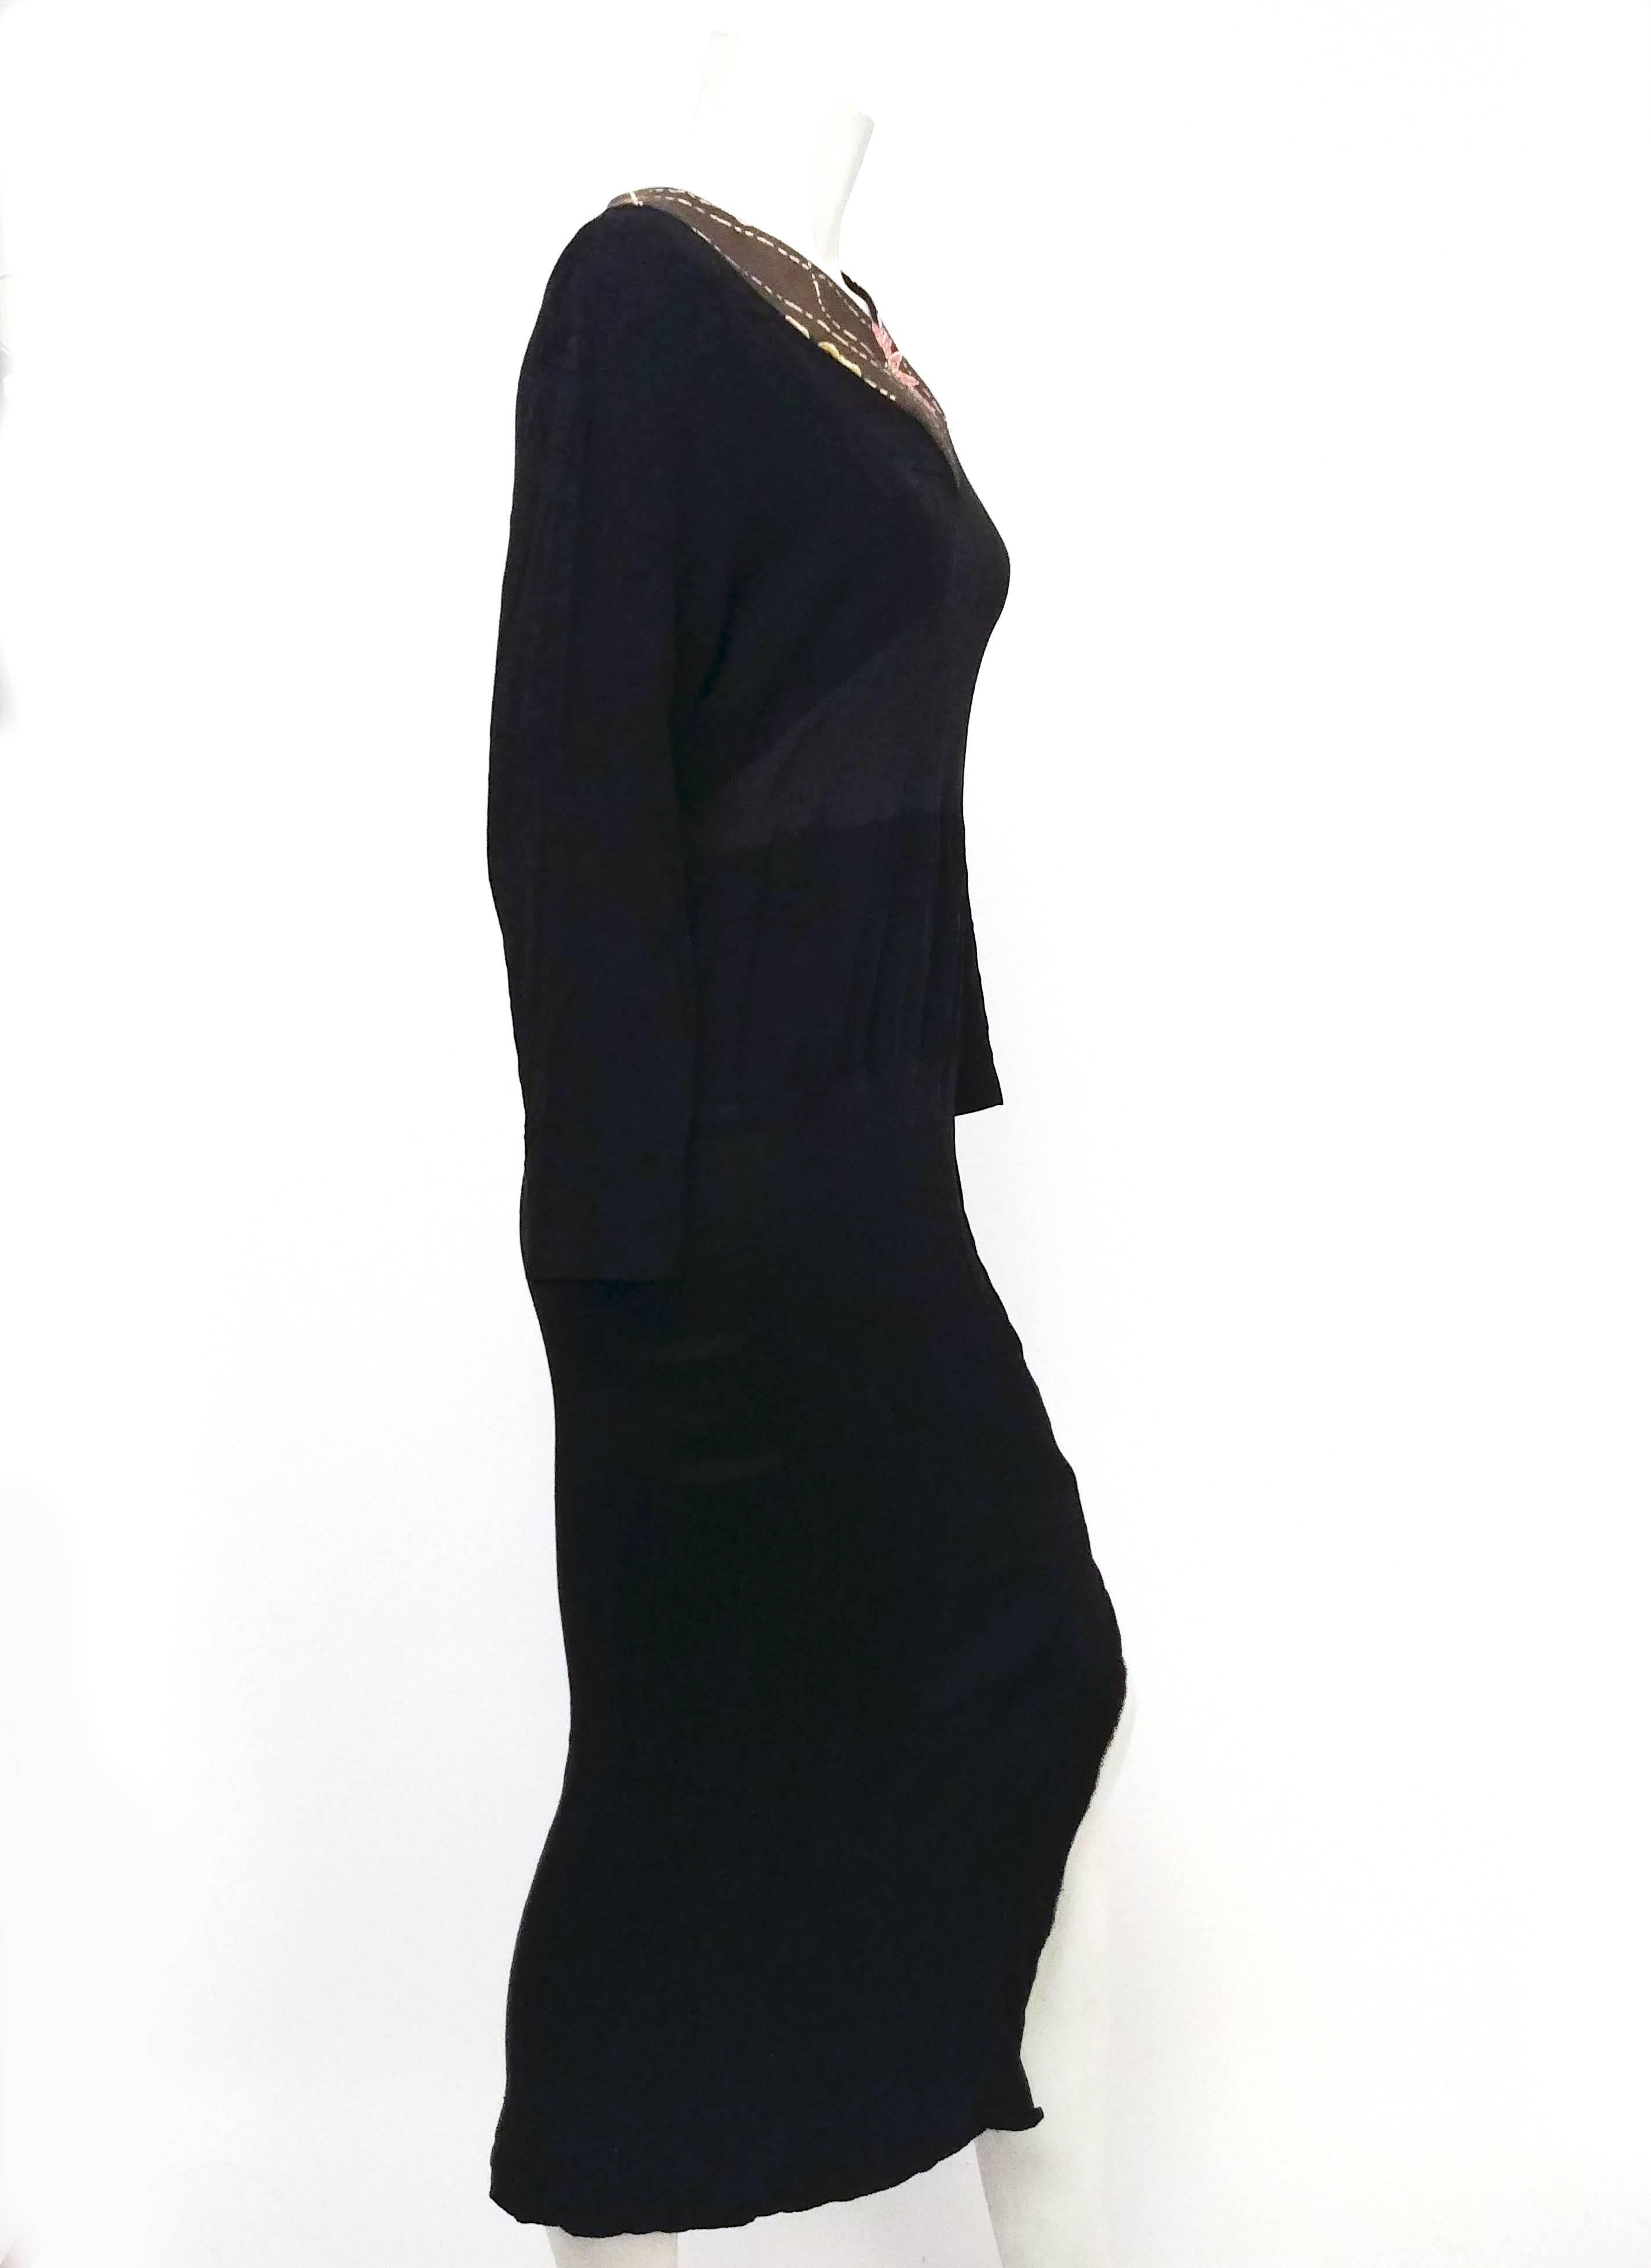 1980s Japanese Black Pleated Dress w/ Kimono Silk Trim. Set pleats and floral jacquard fabric. No closures, slips on over heads. Slight amount of stretch due to pleats. Attached waist ties at back. 